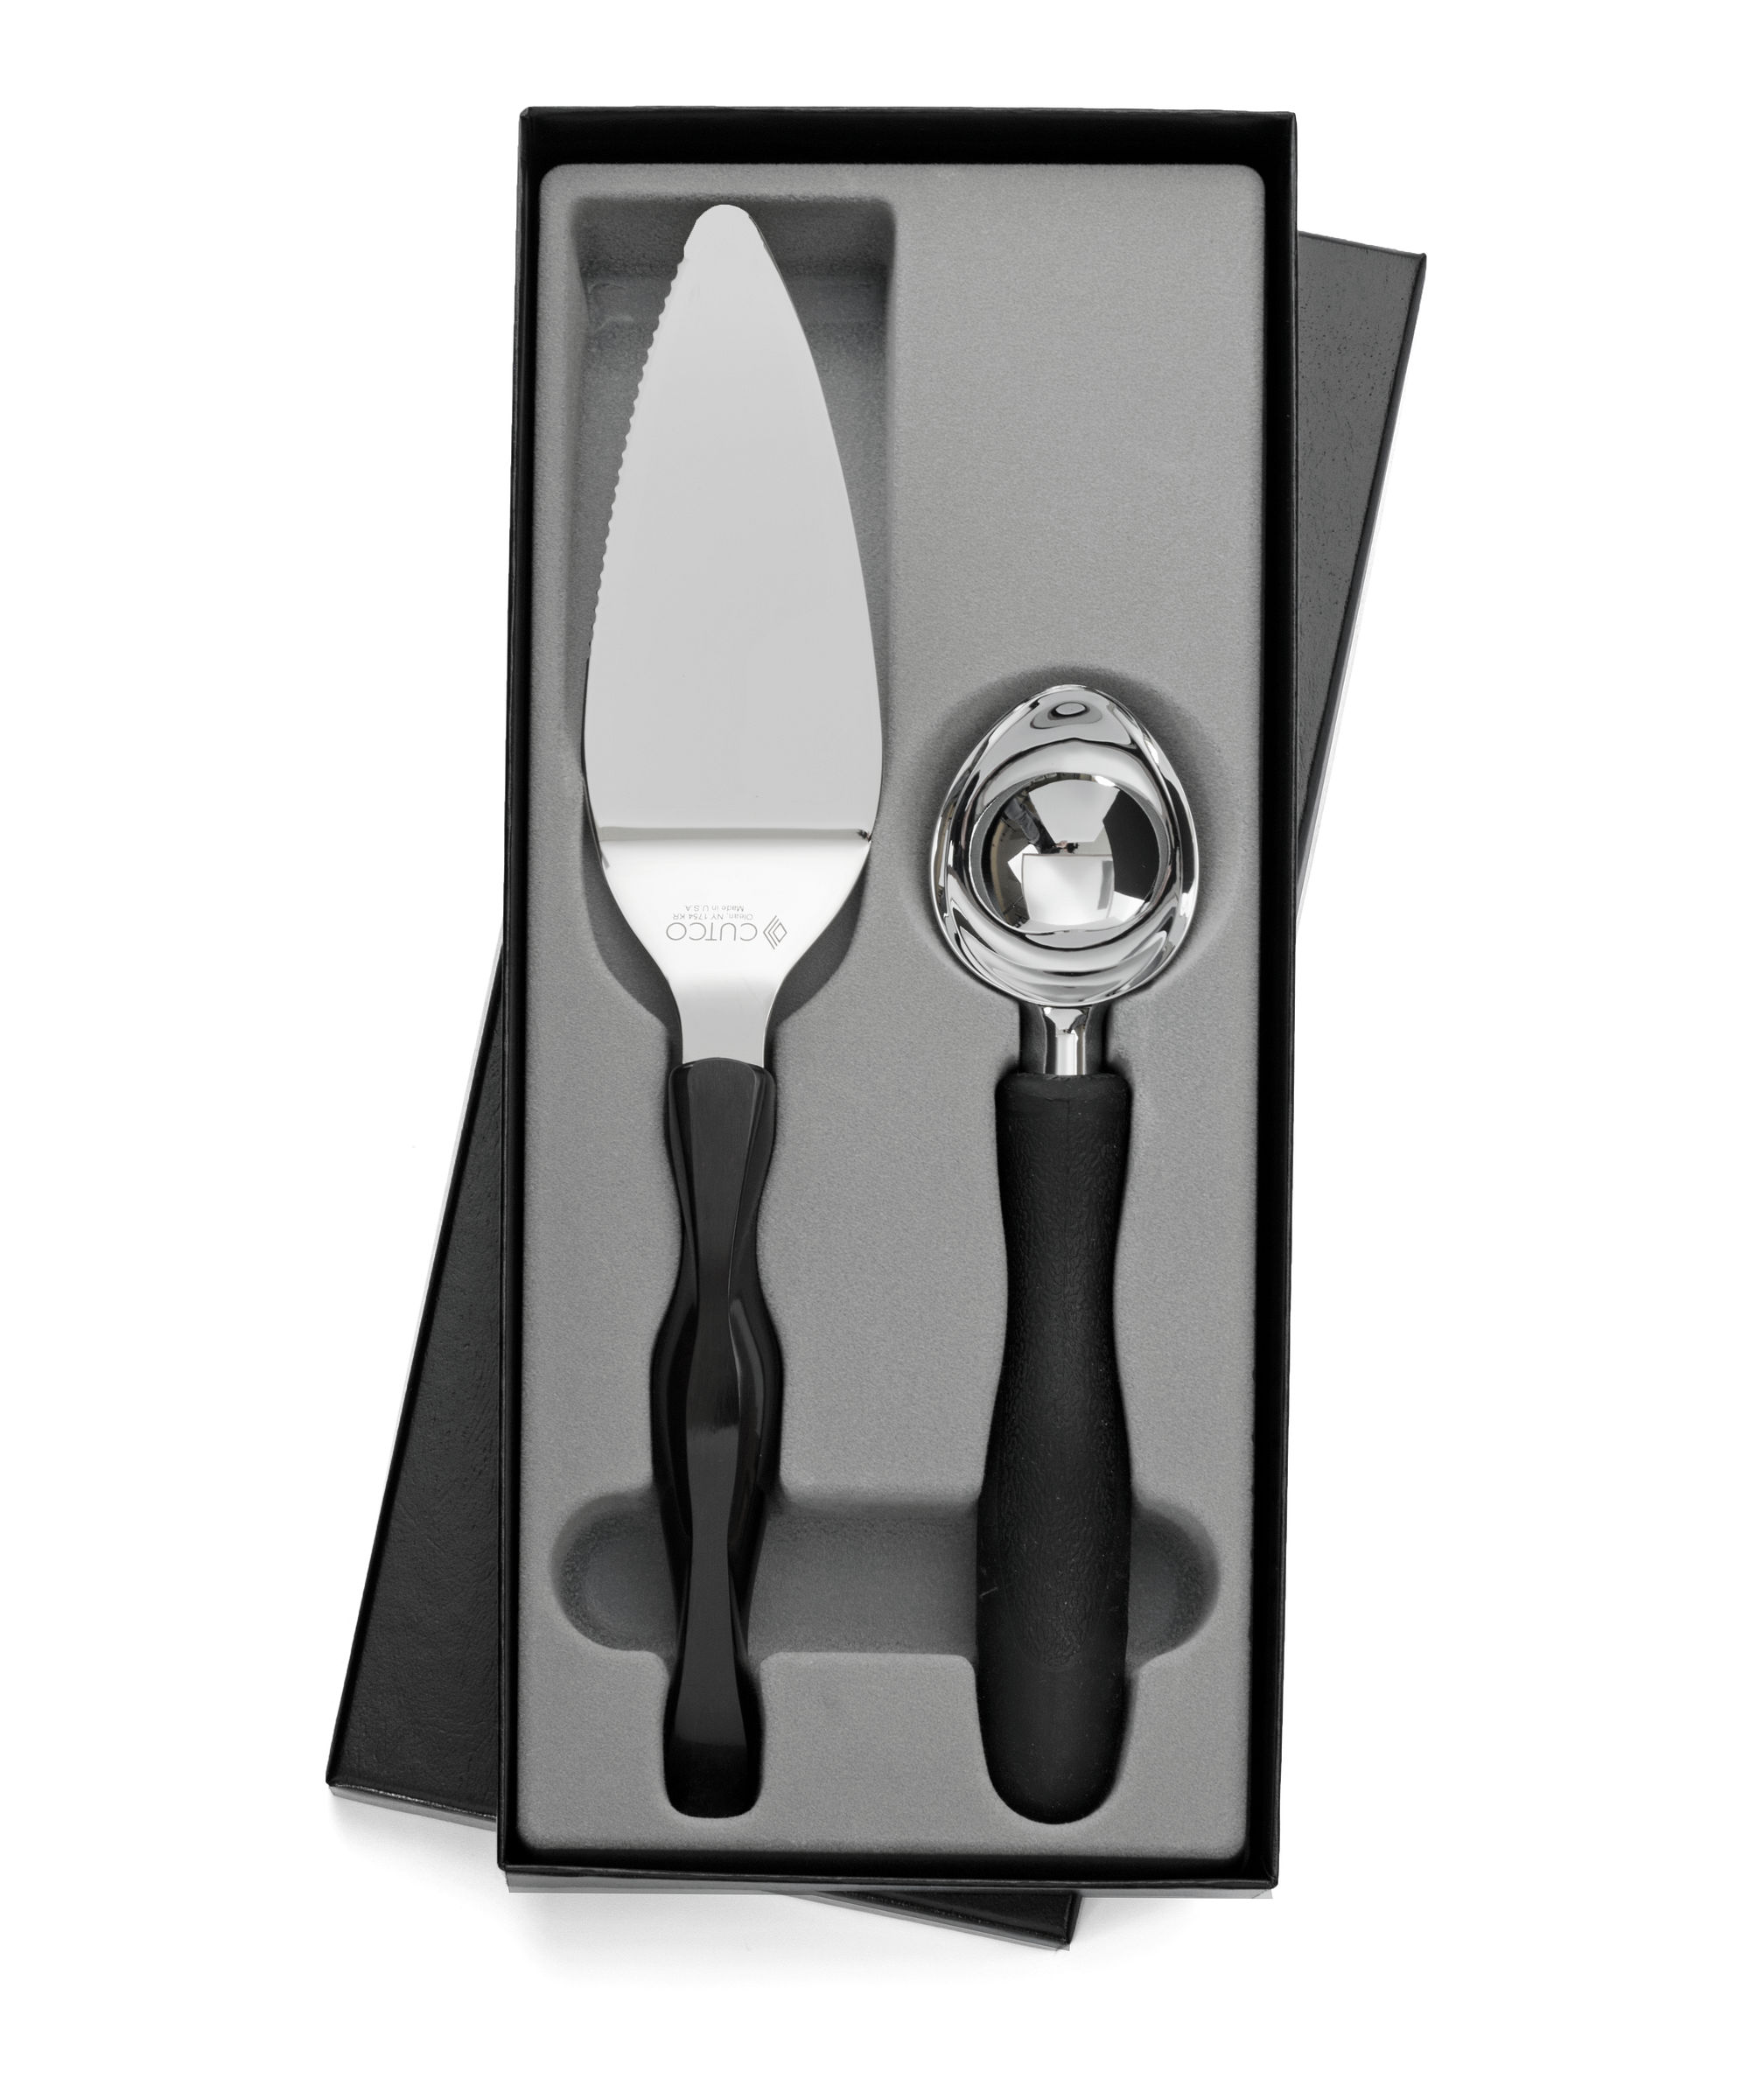  CUTCO Model 1838 Entertainer Set in special CUTCO gift box.   Includes 1501 Peeler, 1502 Pizza Cutter, 1503 Ice Cream Scoop,  and 1504 Cheese Knife. .. High Carbon Stainless blades and